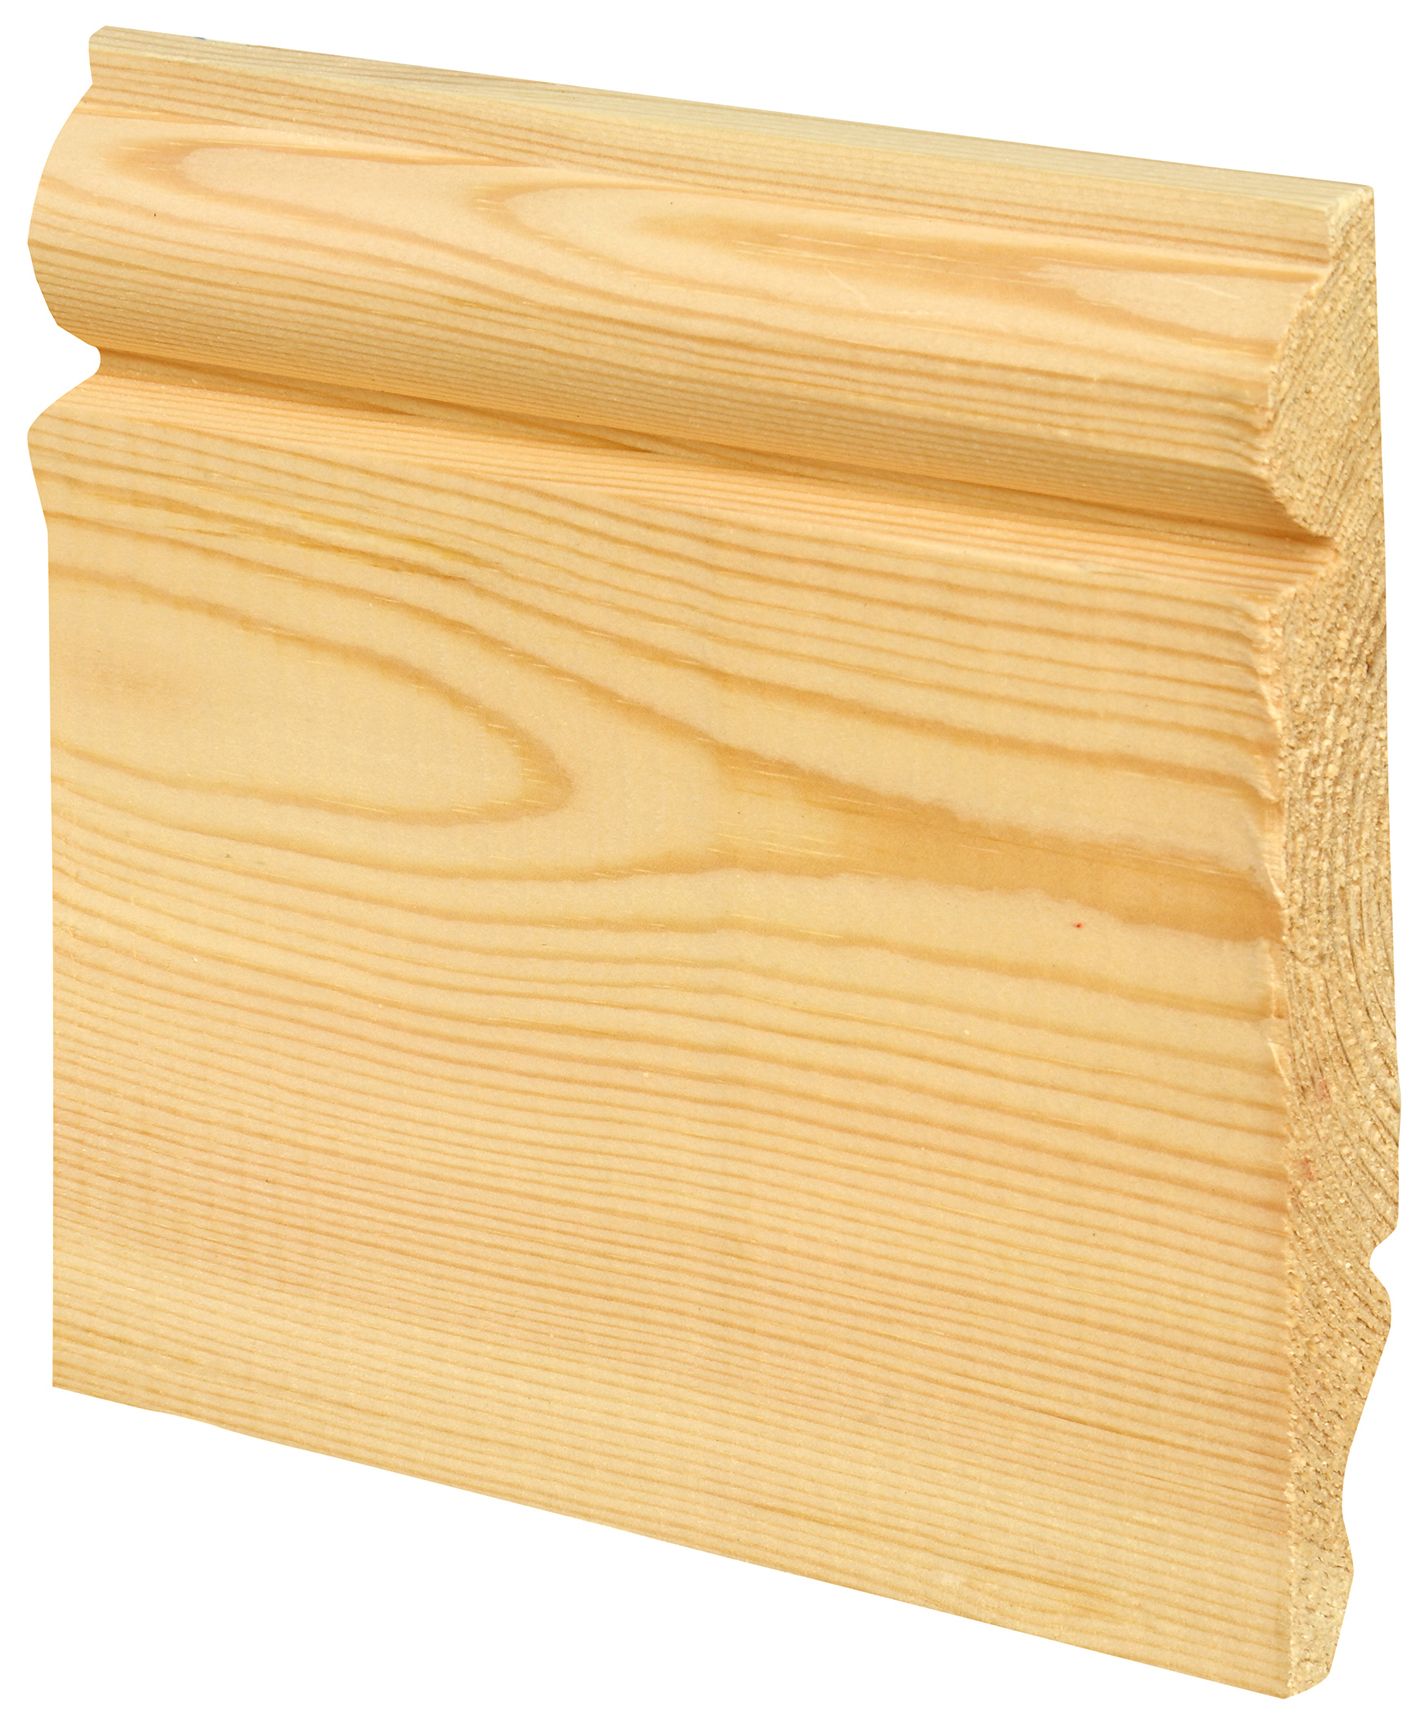 Image of Wickes Torus / Ogee Natural Pine Skirting - 19 x 144 x 4200mm